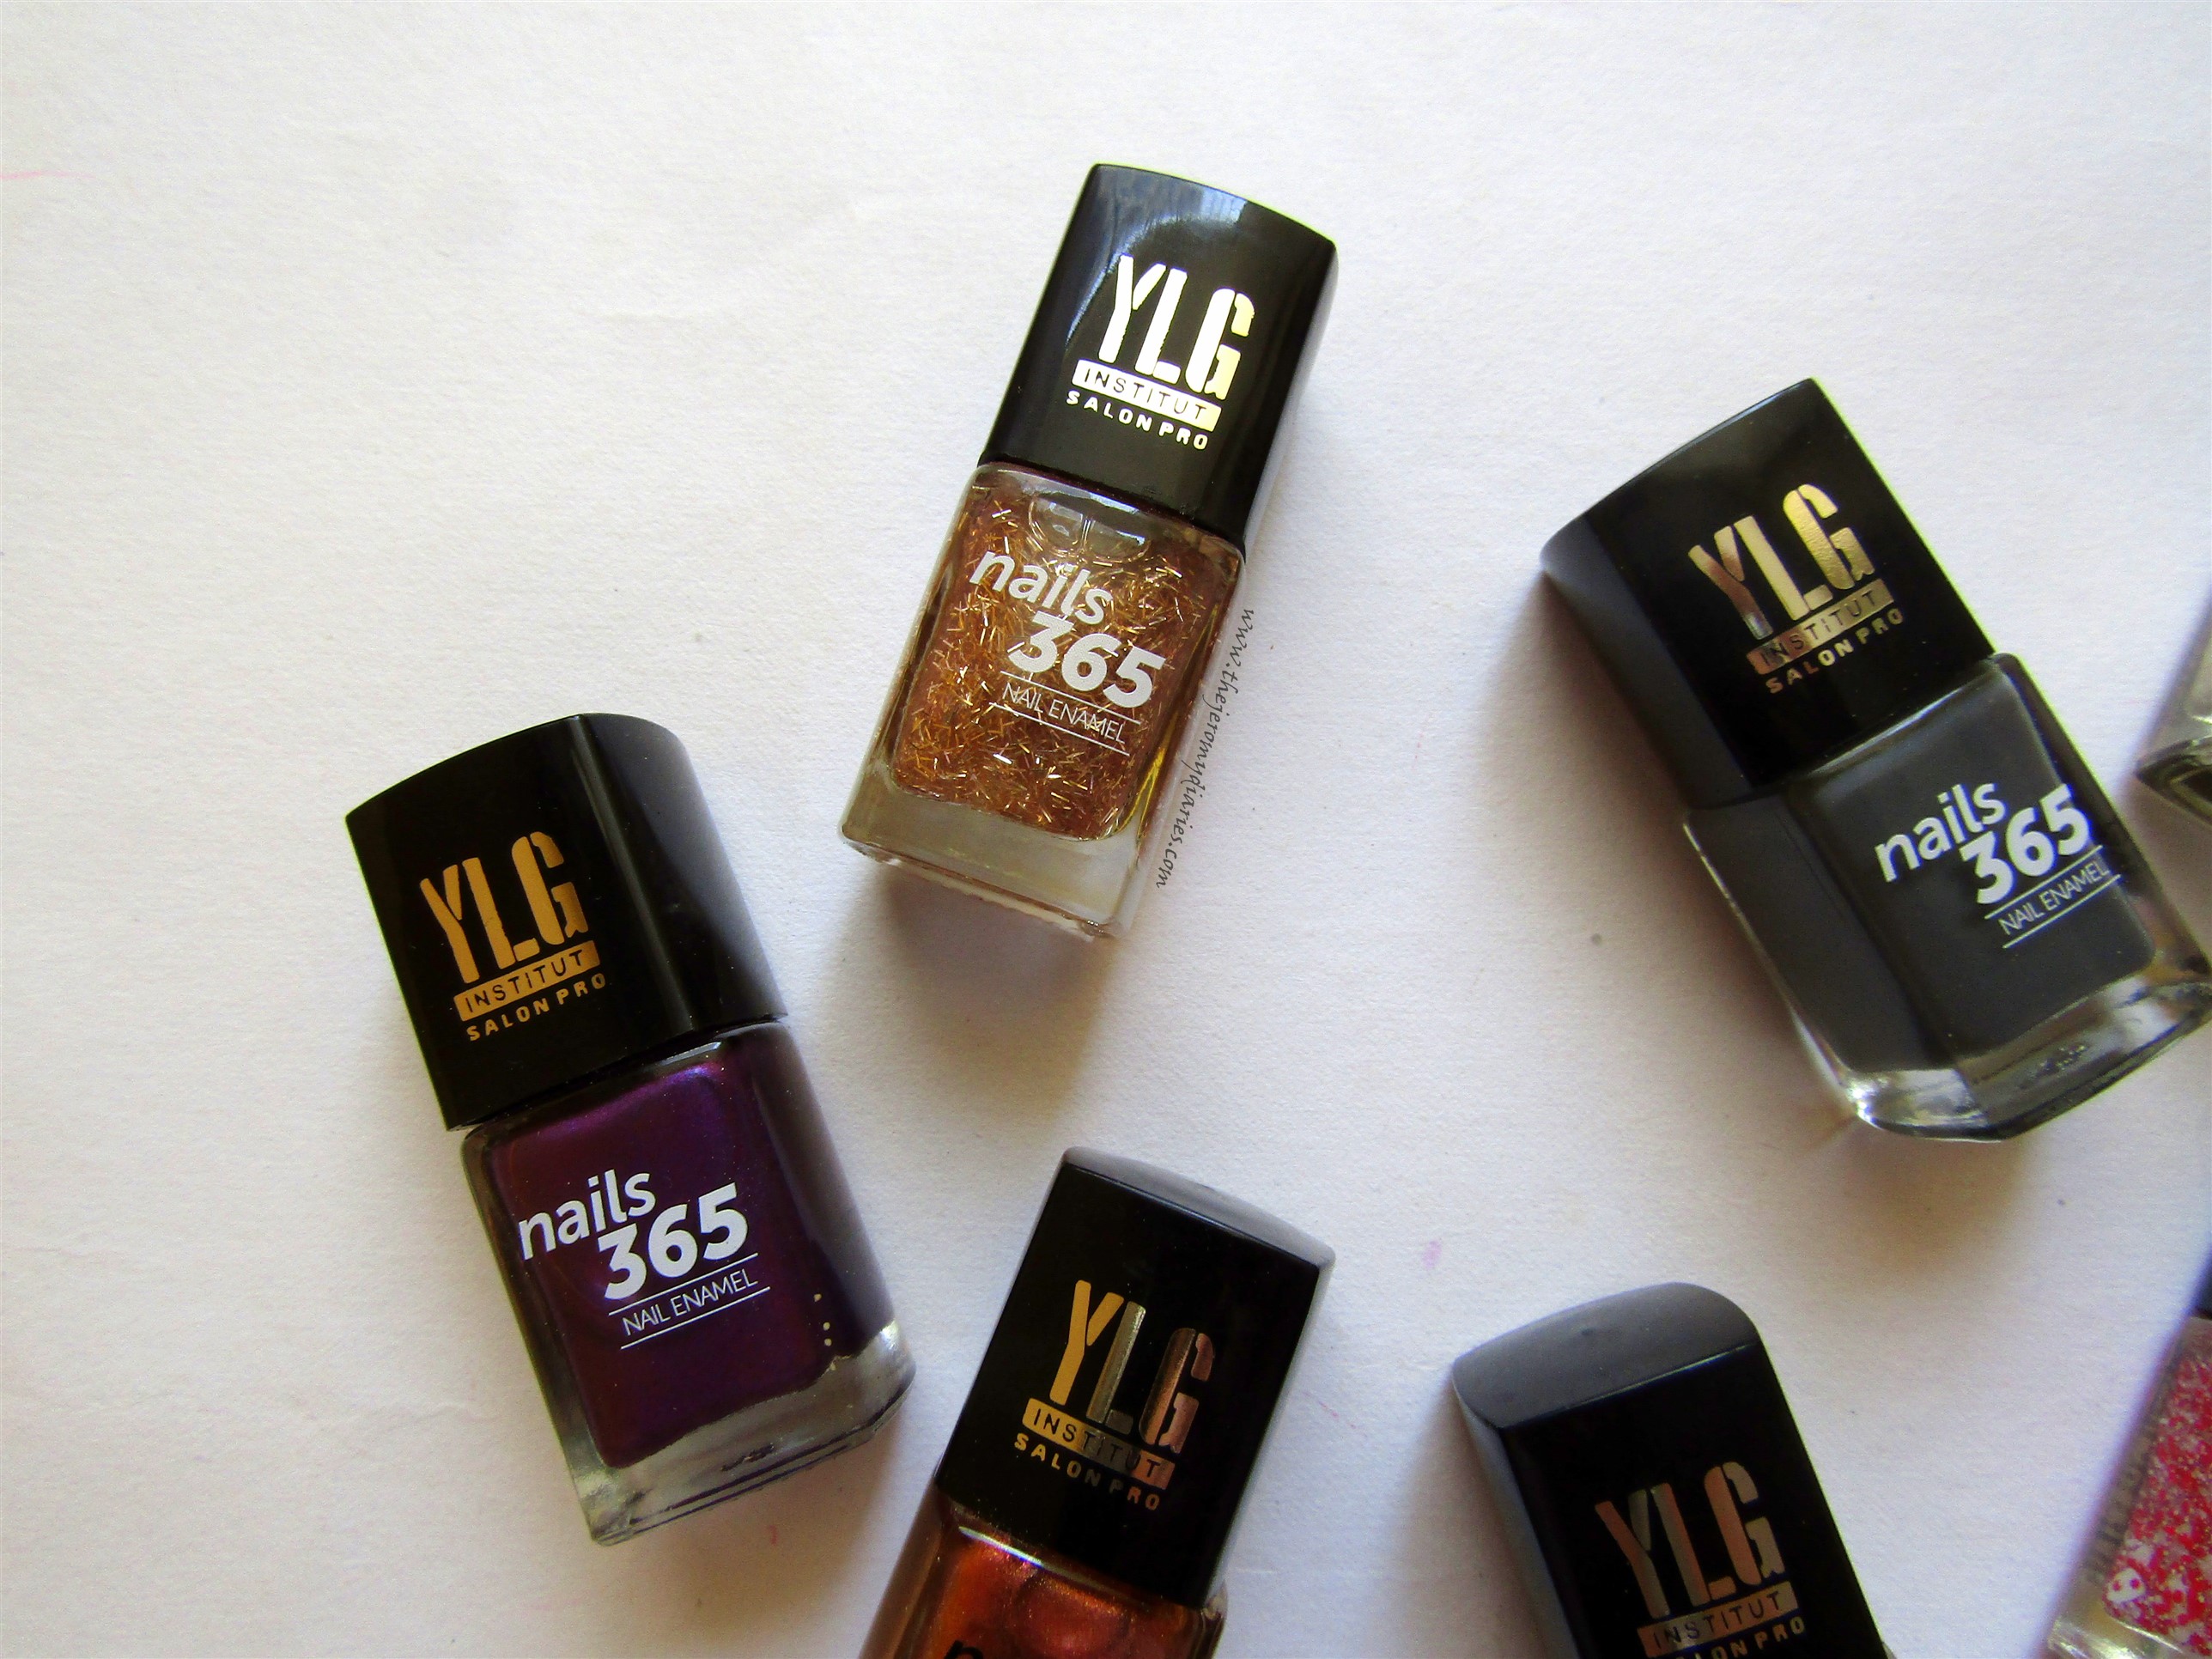 ylg nails 365 glitter nail paints the jeromy diaries